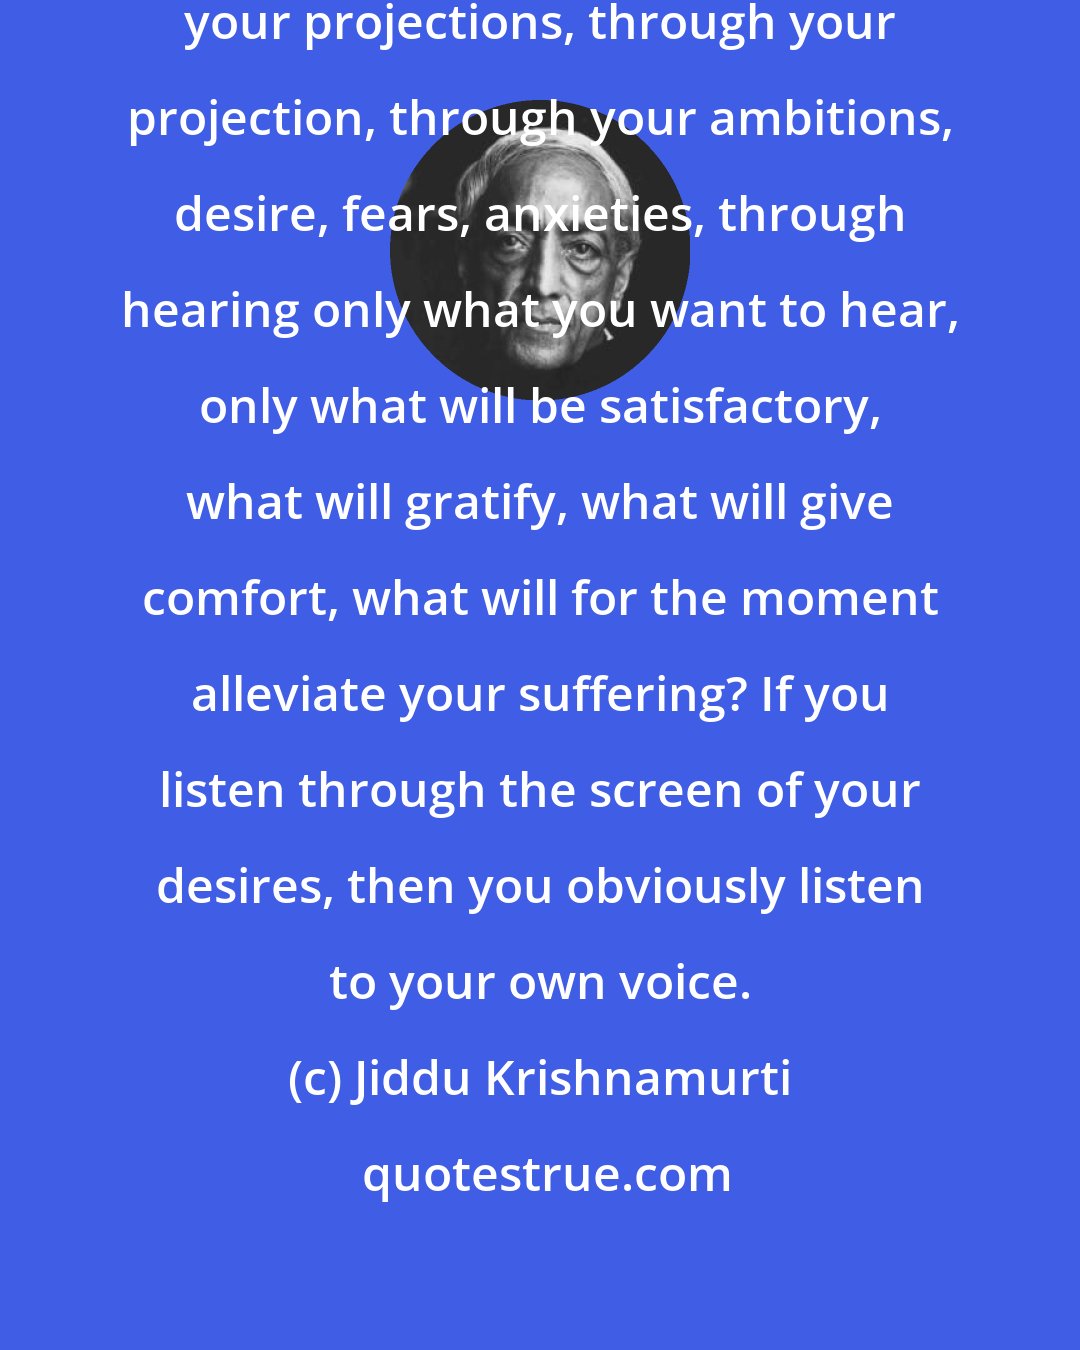 Jiddu Krishnamurti: How do you listen? Do you listen with your projections, through your projection, through your ambitions, desire, fears, anxieties, through hearing only what you want to hear, only what will be satisfactory, what will gratify, what will give comfort, what will for the moment alleviate your suffering? If you listen through the screen of your desires, then you obviously listen to your own voice.